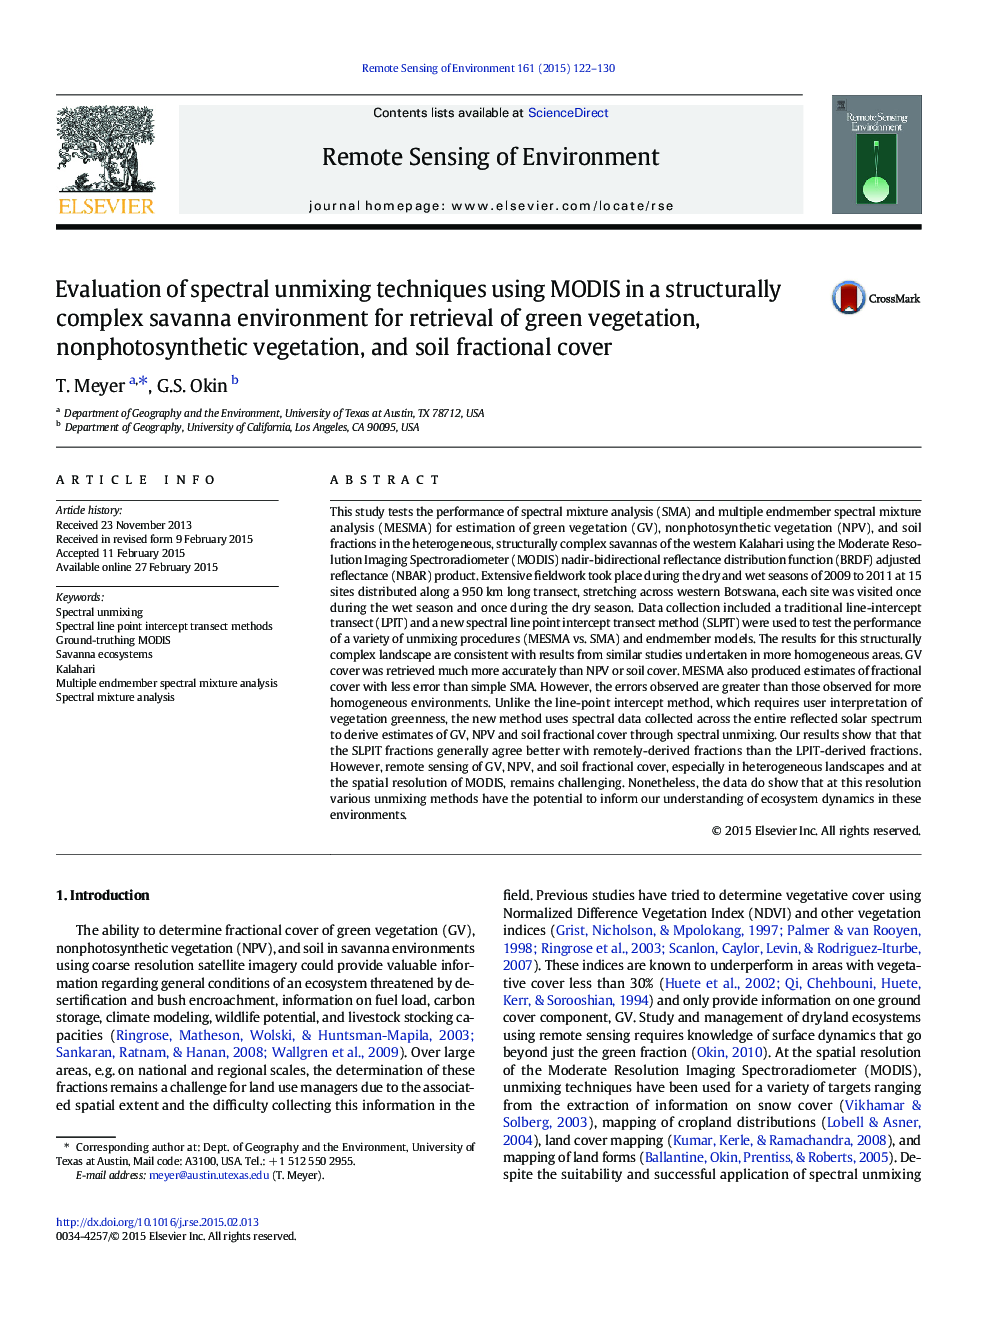 Evaluation of spectral unmixing techniques using MODIS in a structurally complex savanna environment for retrieval of green vegetation, nonphotosynthetic vegetation, and soil fractional cover